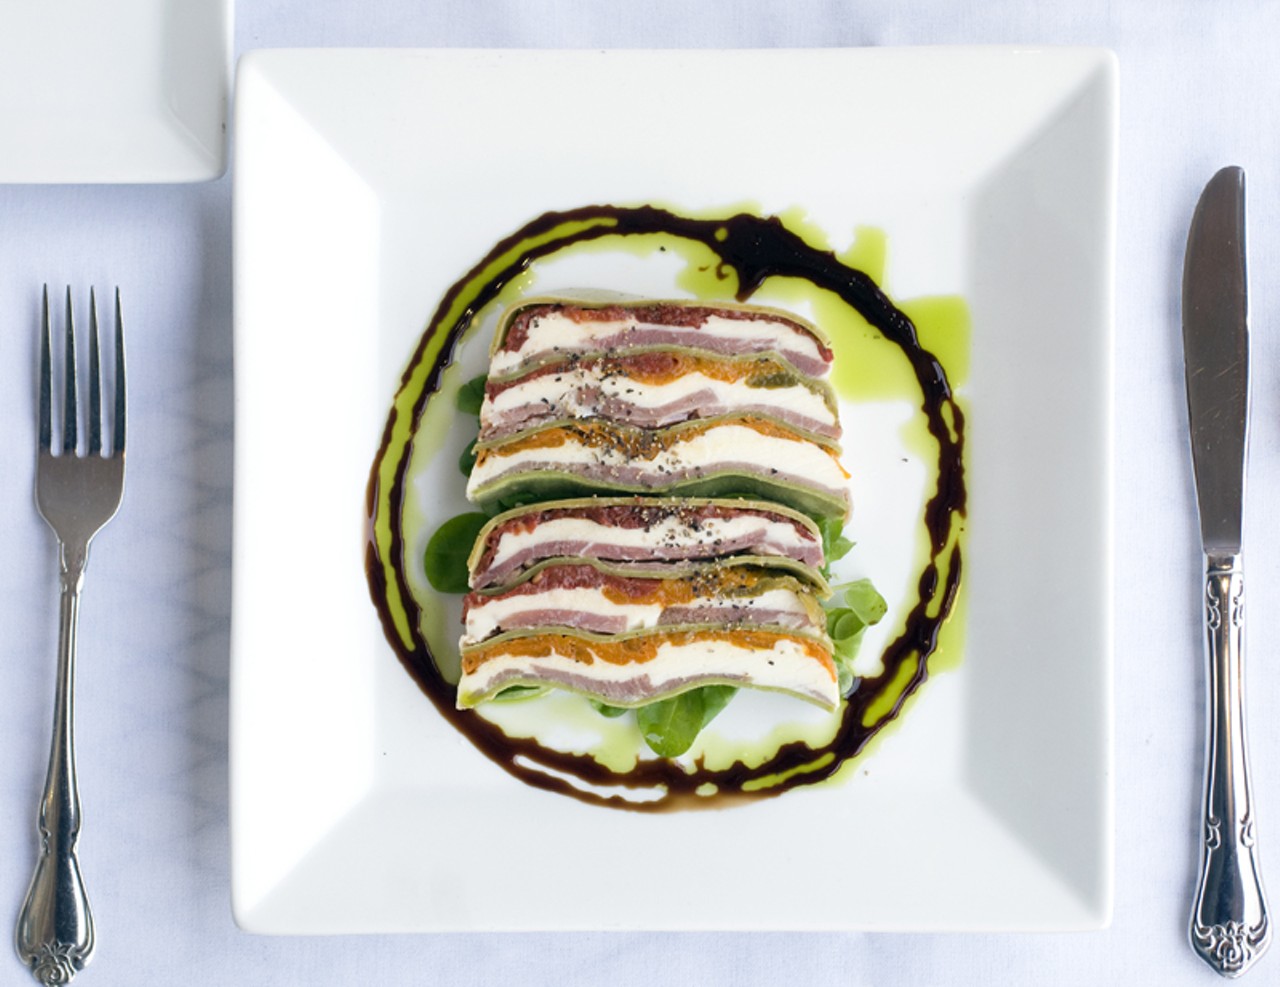 The Heirloom Tomato Terrine is a sliced loaf of heirloom tomatoes, paper-thin prosciutto, fresh mozzarella, house-made spinach pasta, baby mache, basil oil and balsamic gastrique.